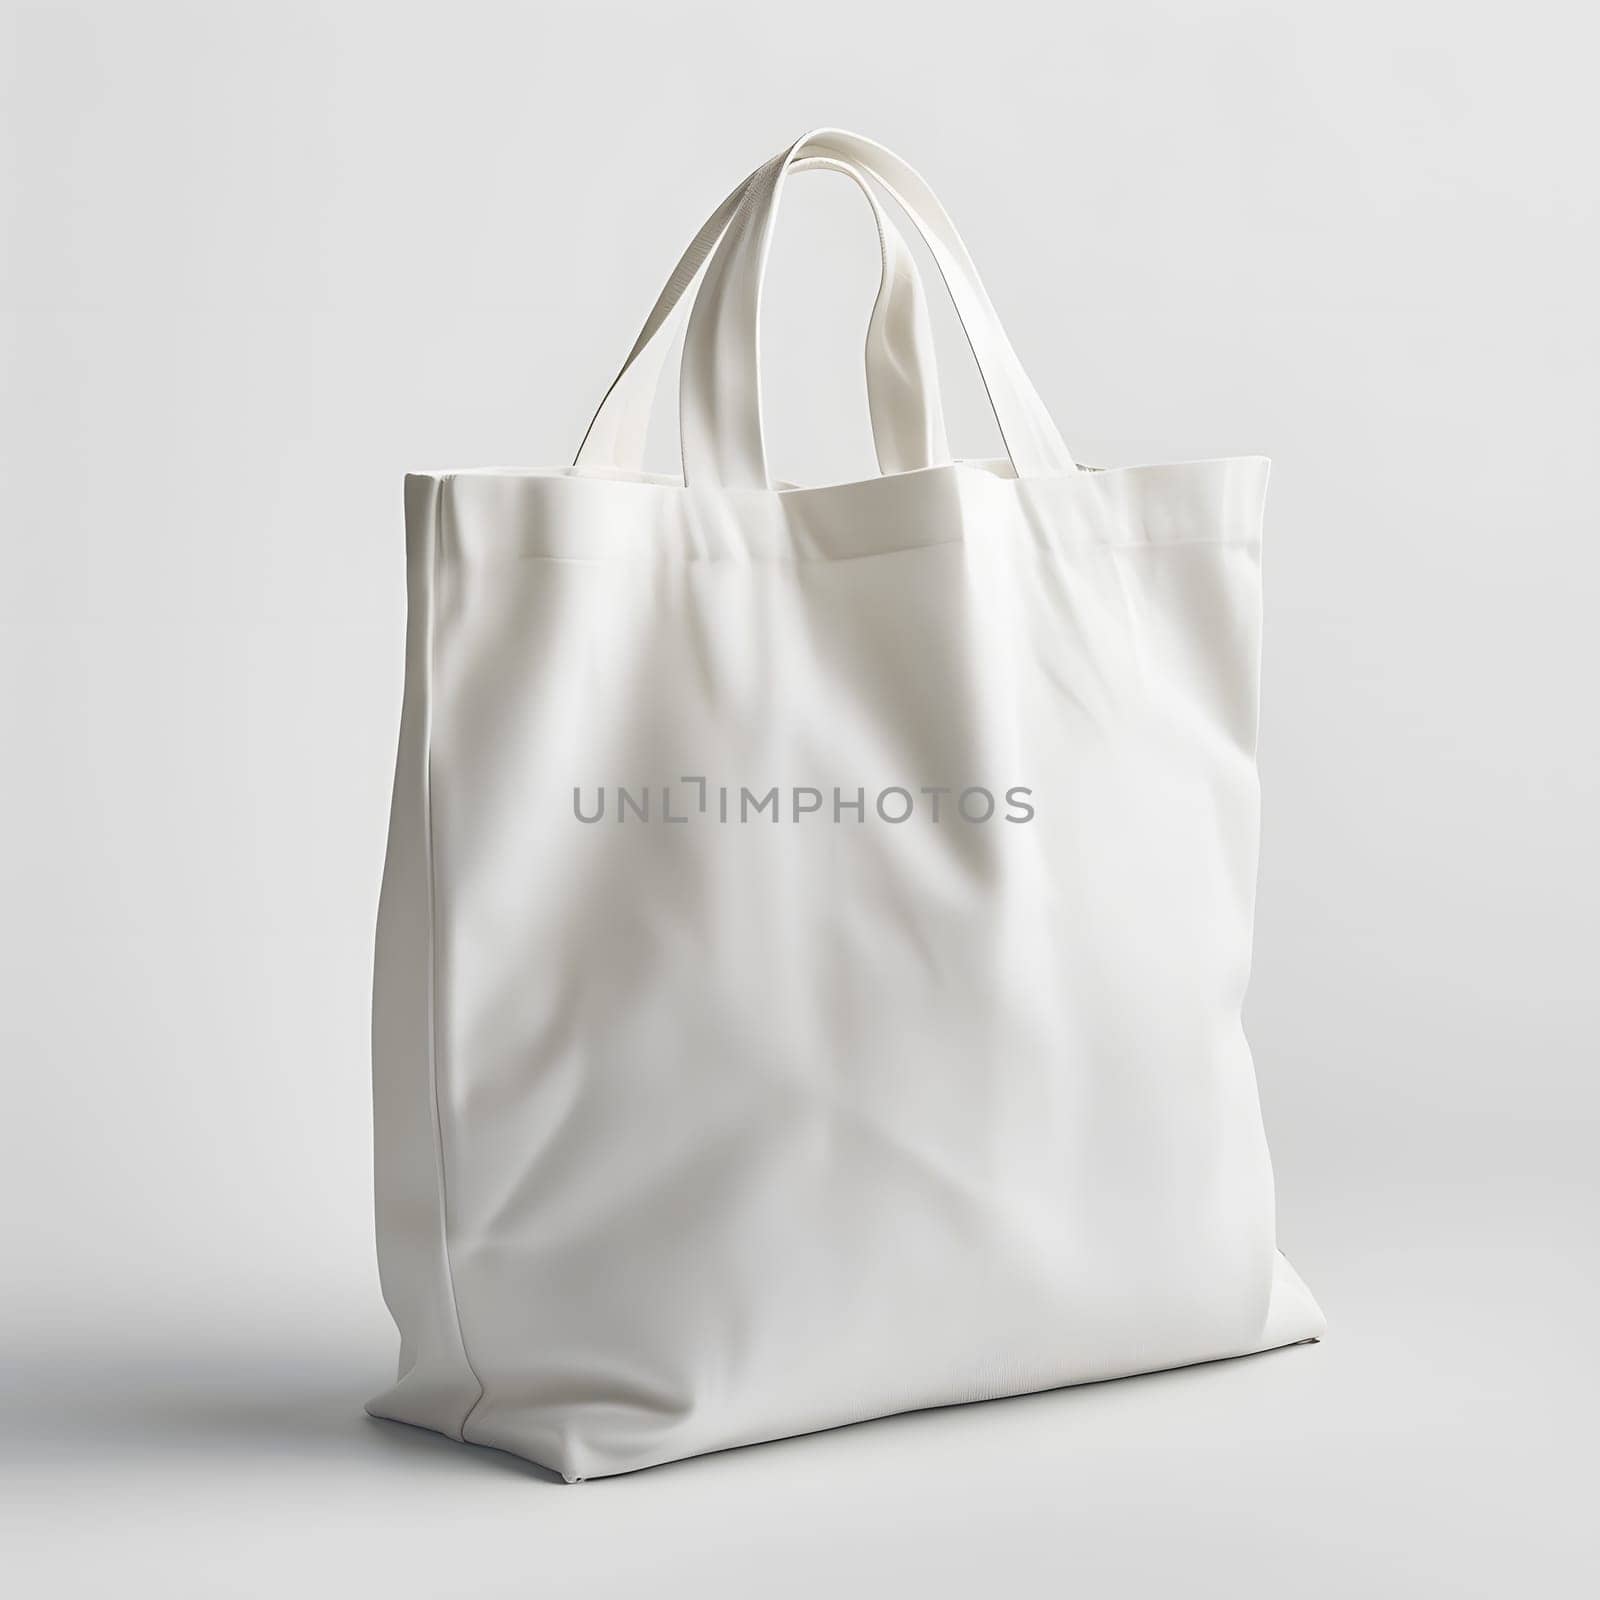 A white tote bag made of natural material on a silver surface by Nadtochiy